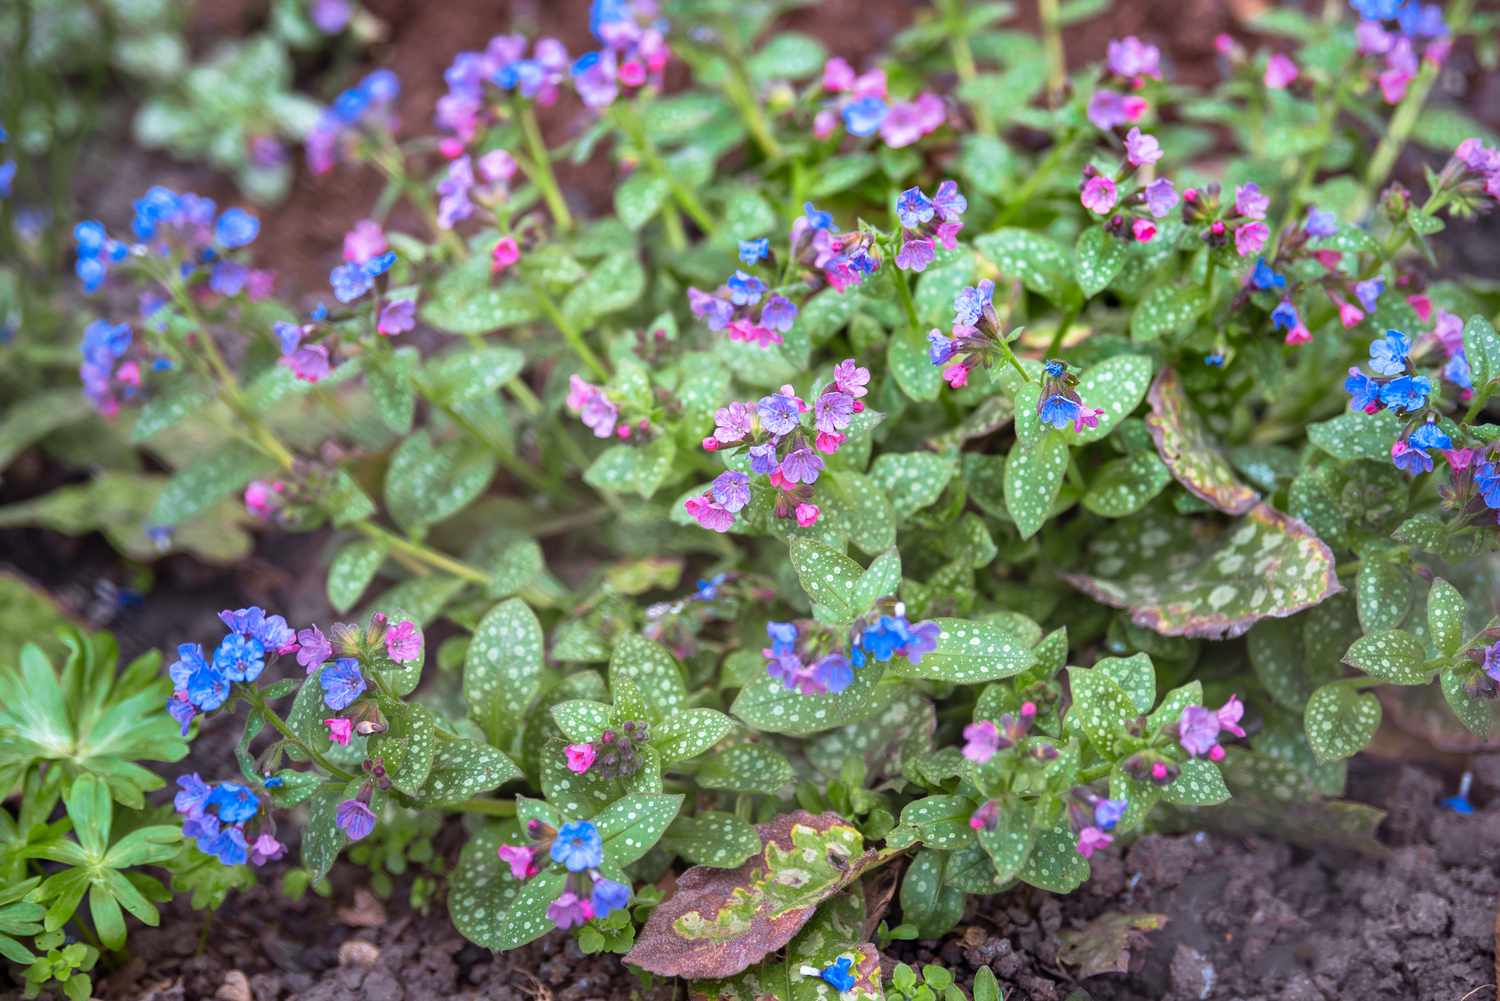 Lungwort plant with tiny pink, purple and blue flowers with white spotted leaves